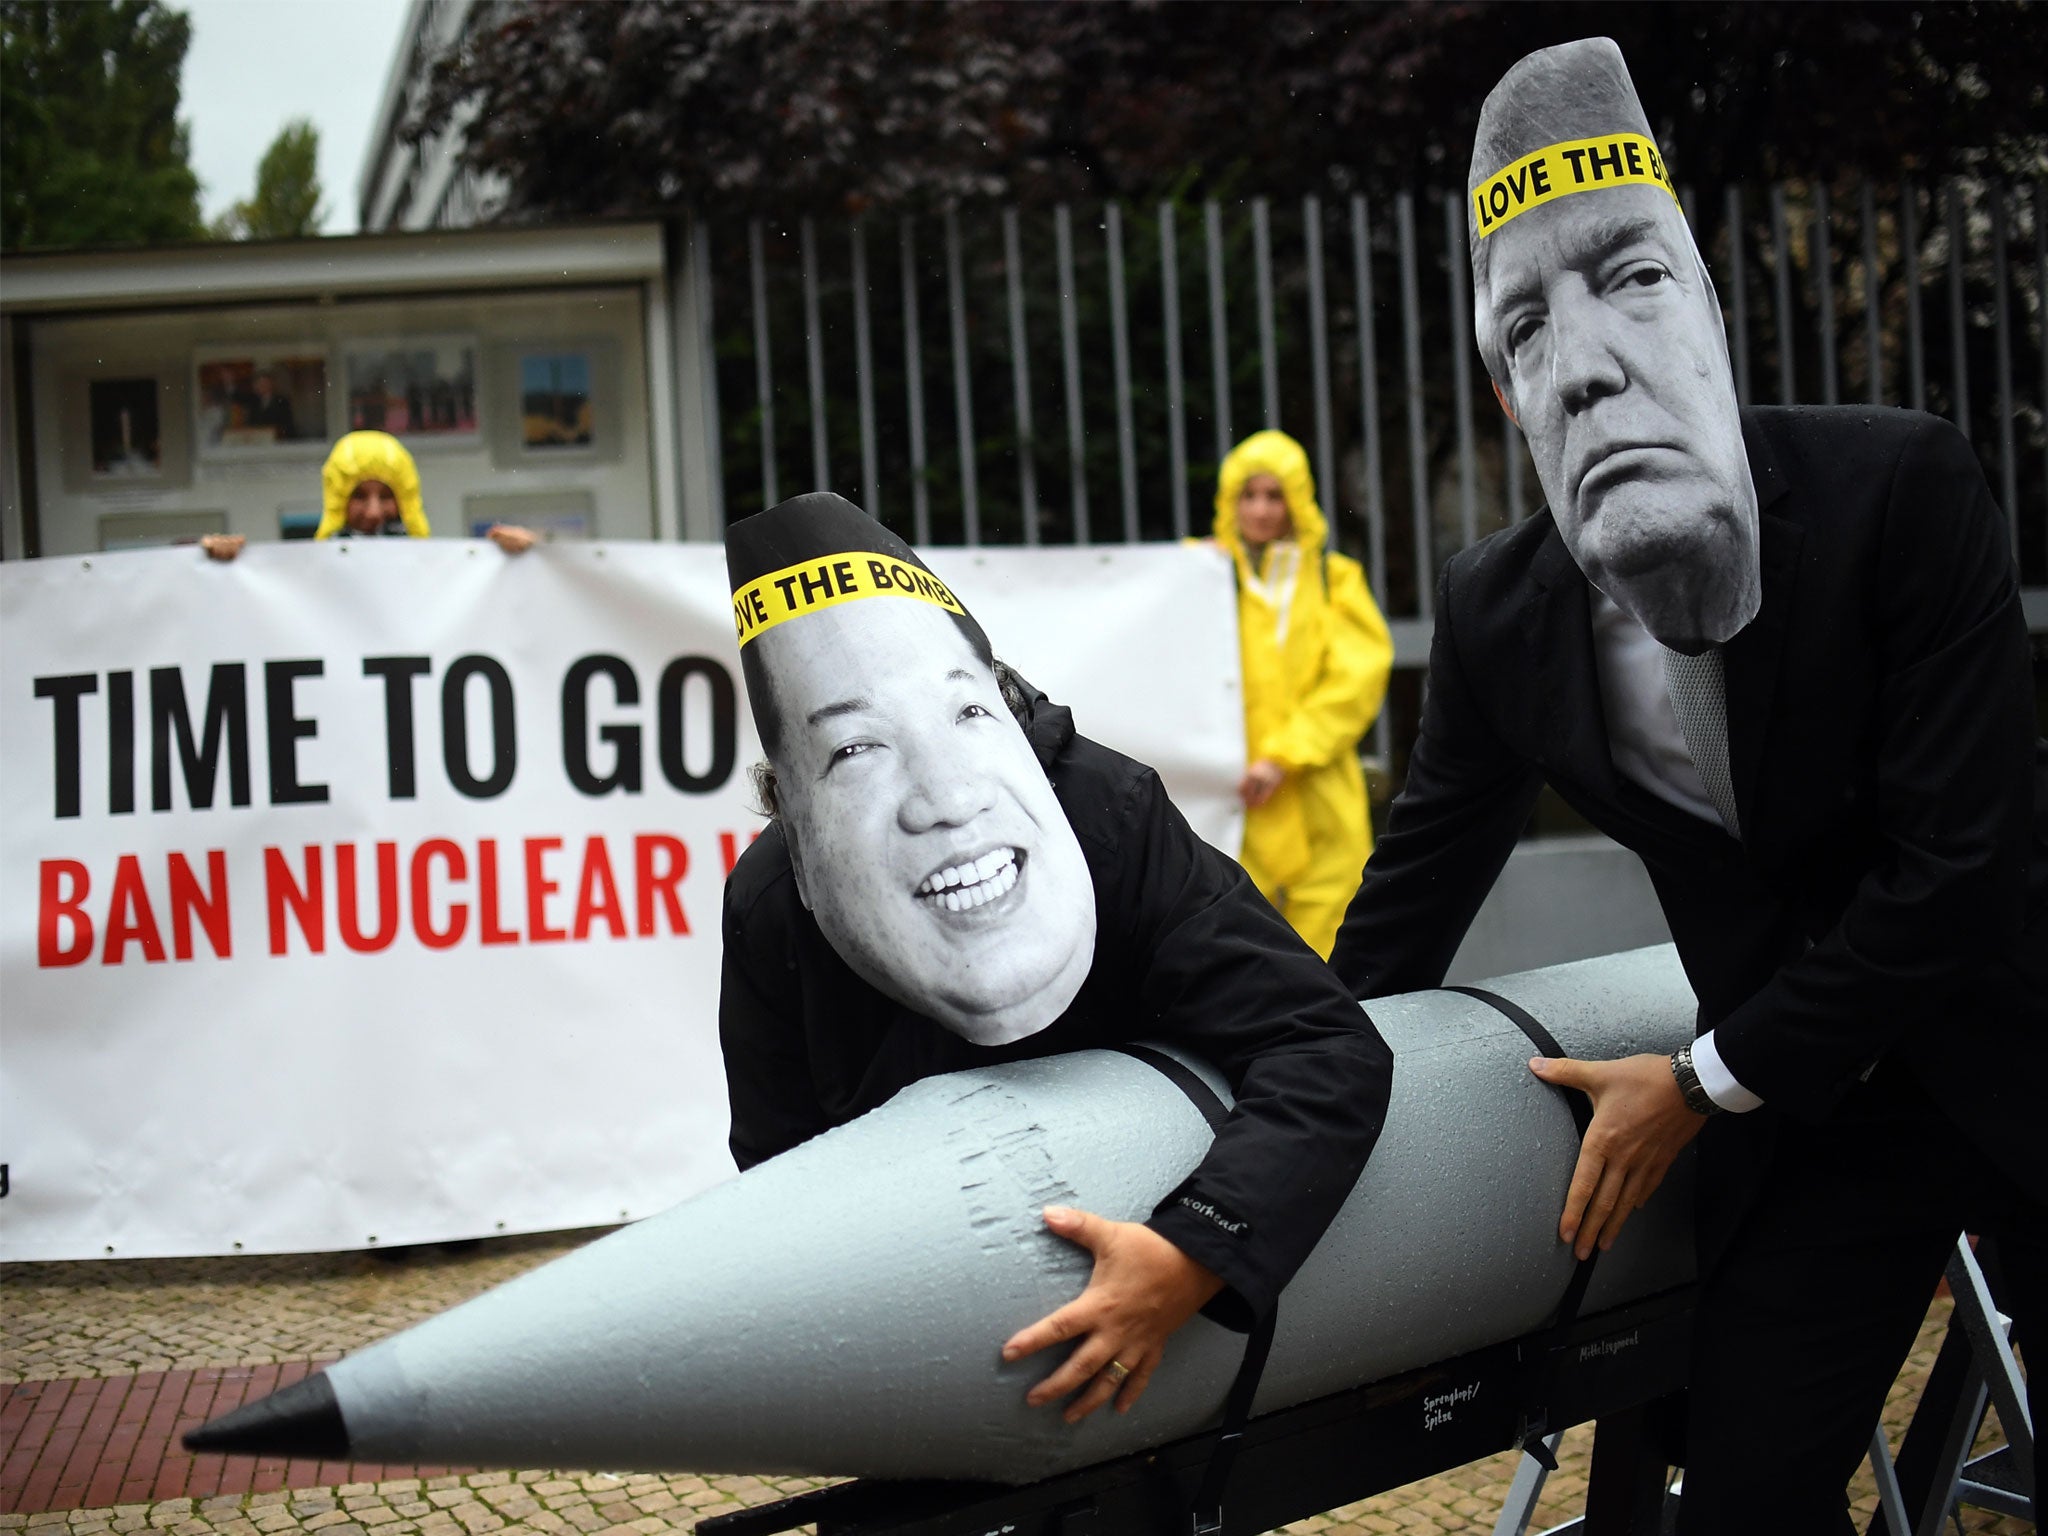 Activists from the International Campaign to Abolish Nuclear Weapons protest against the conflict between North Korea and the US